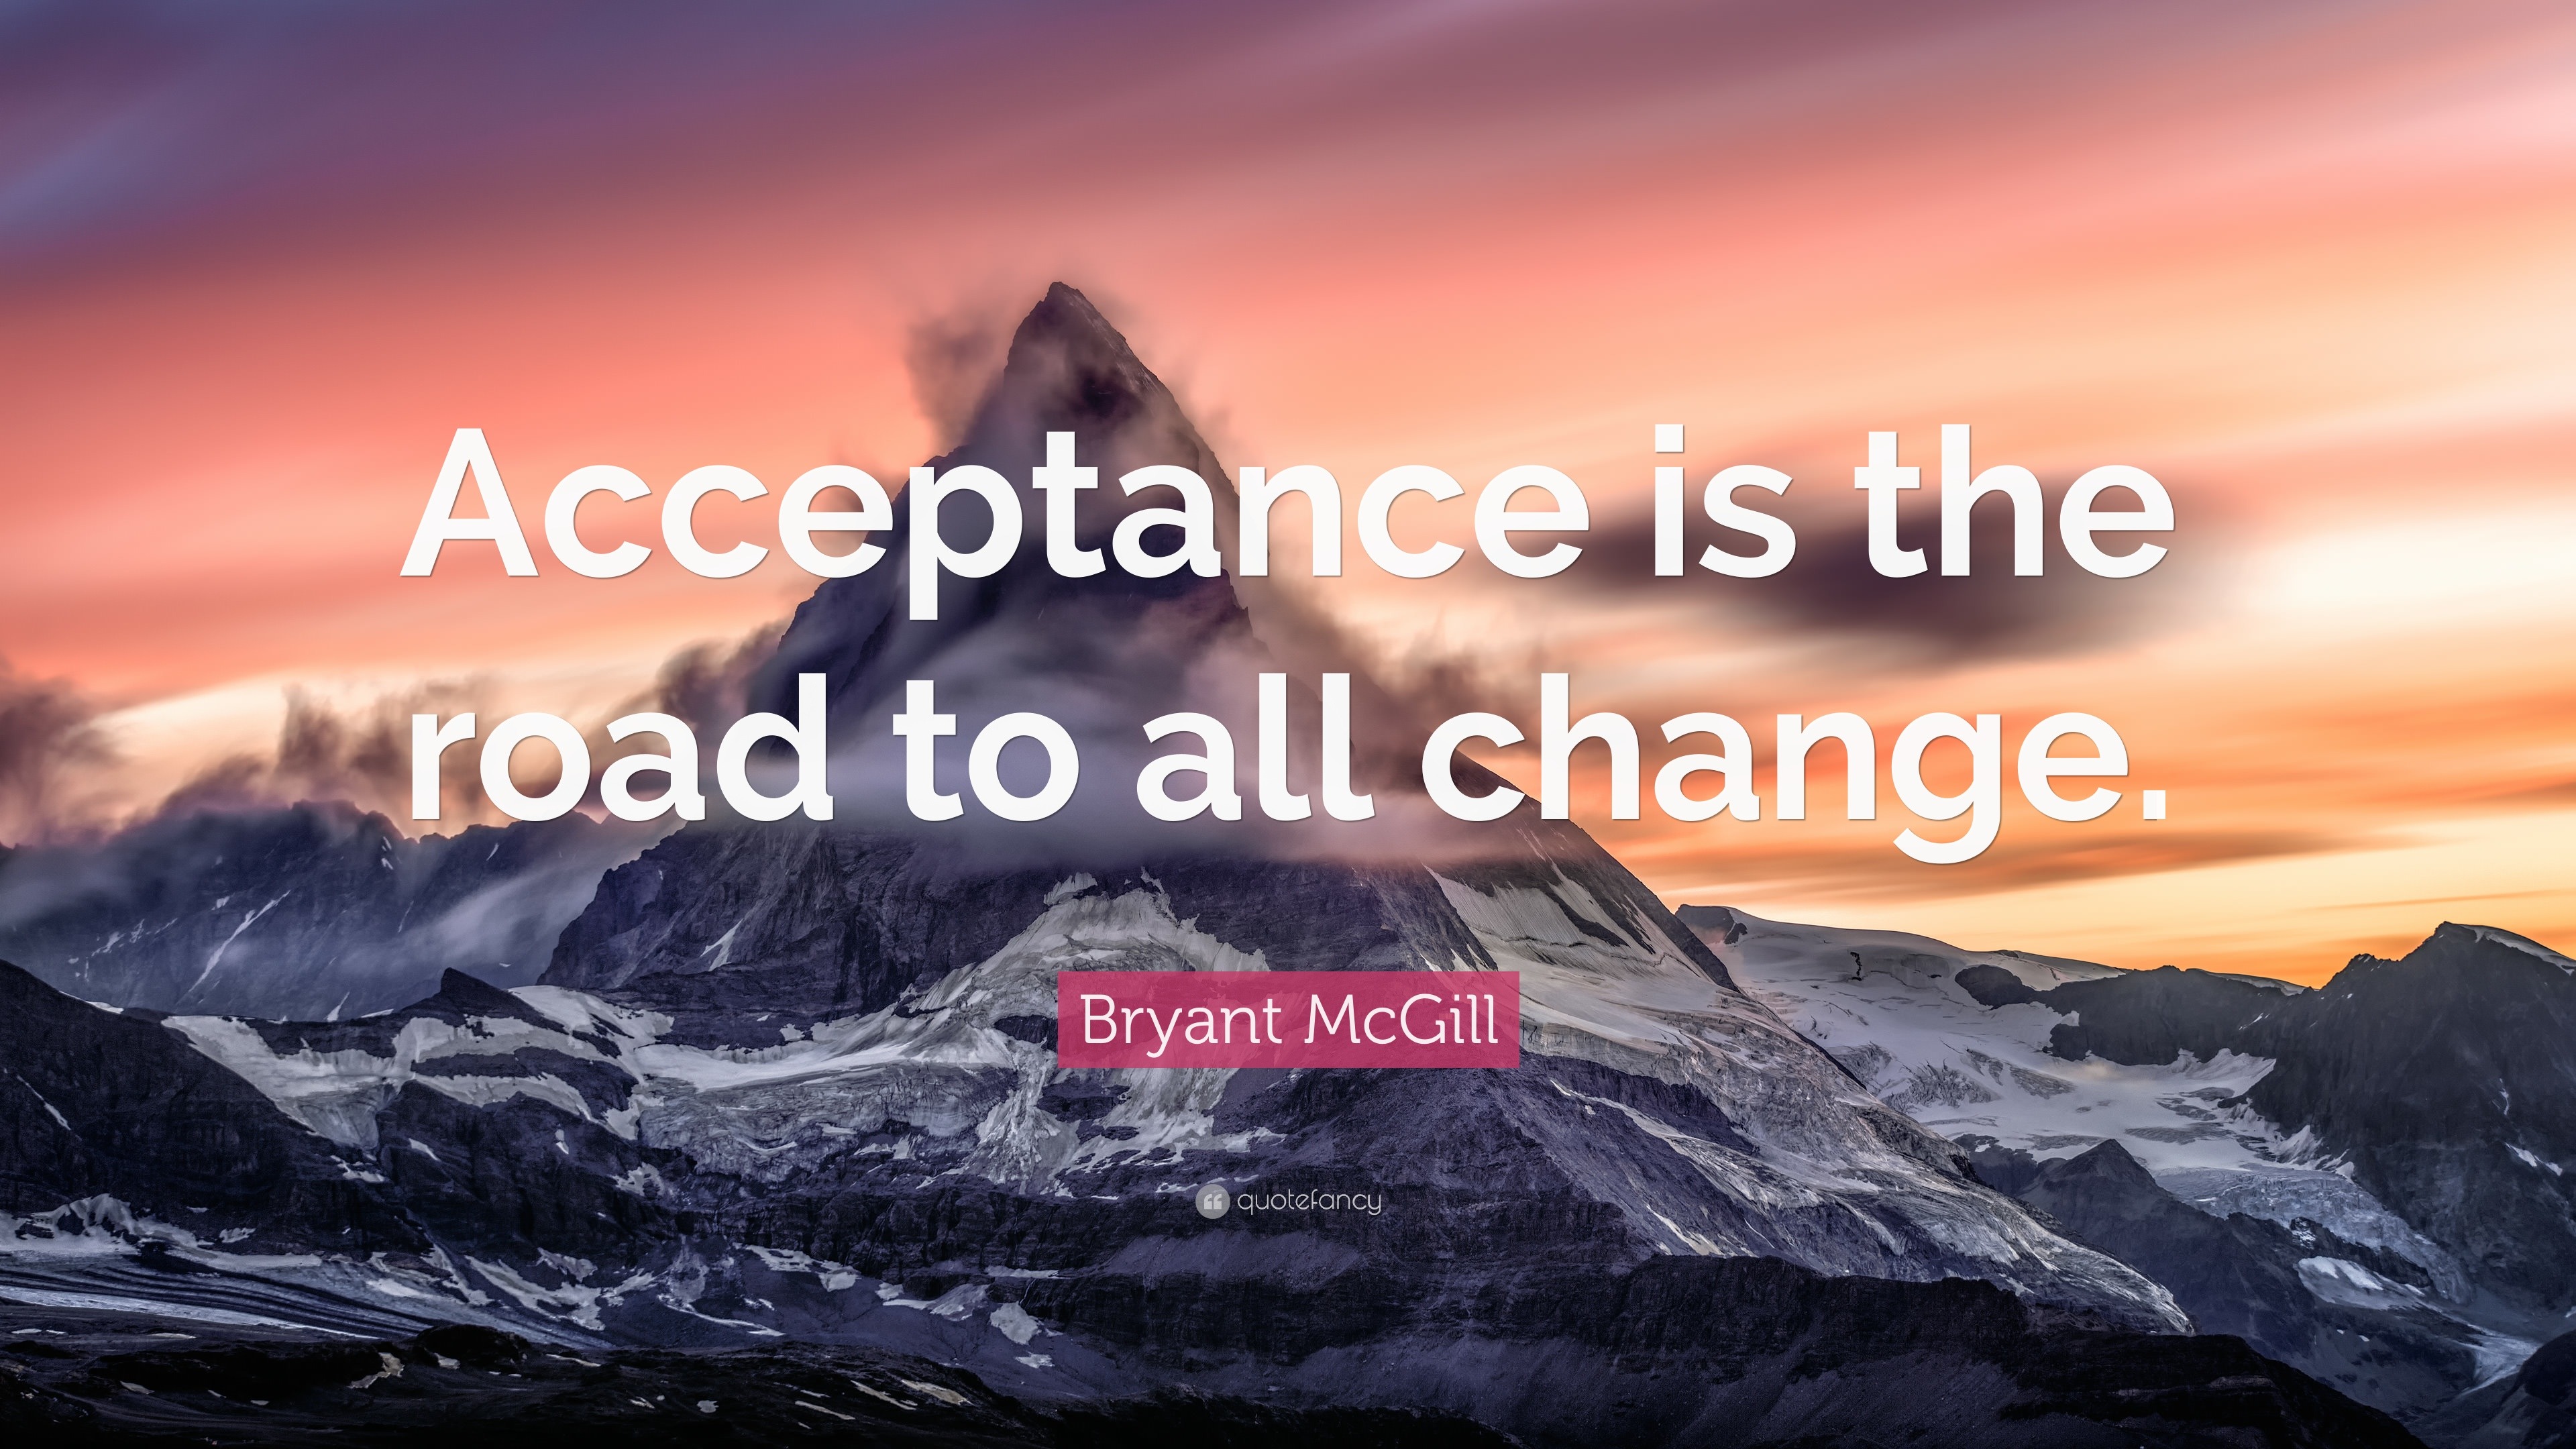 Bryant McGill Quote: “Acceptance is the road to all change.”